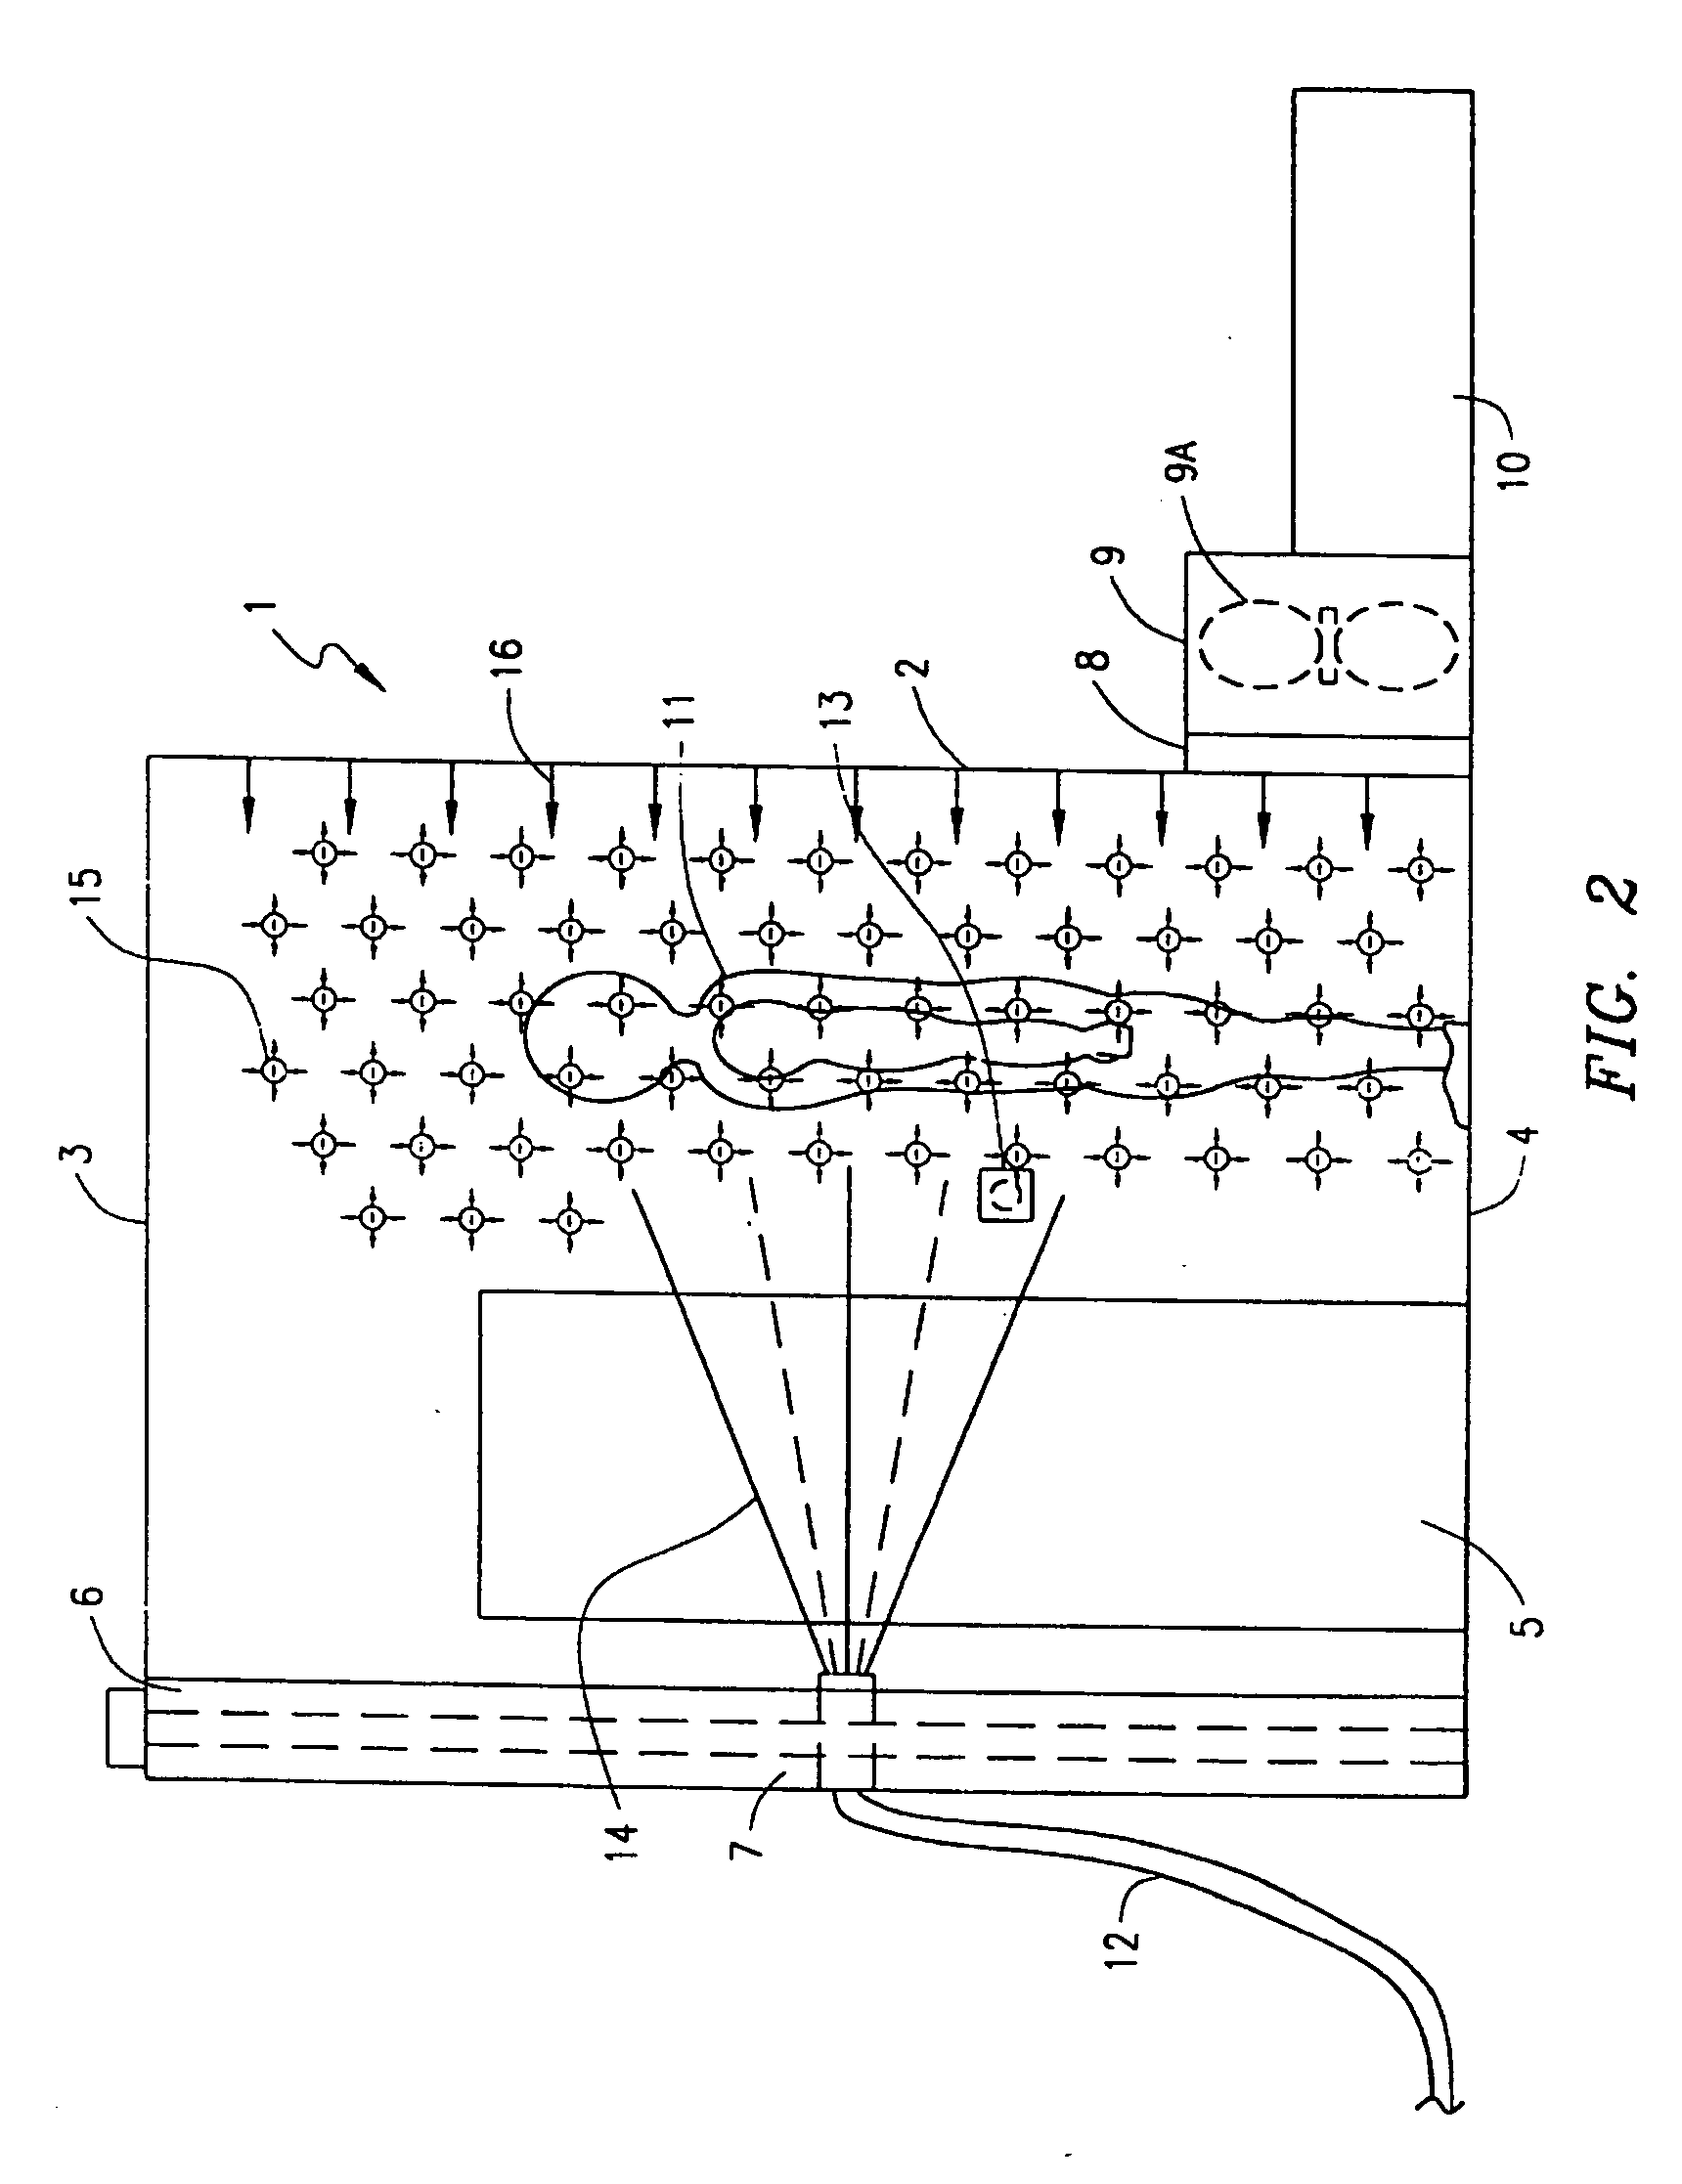 Misting apparatus for electrostatic application of coating materials to body surfaces